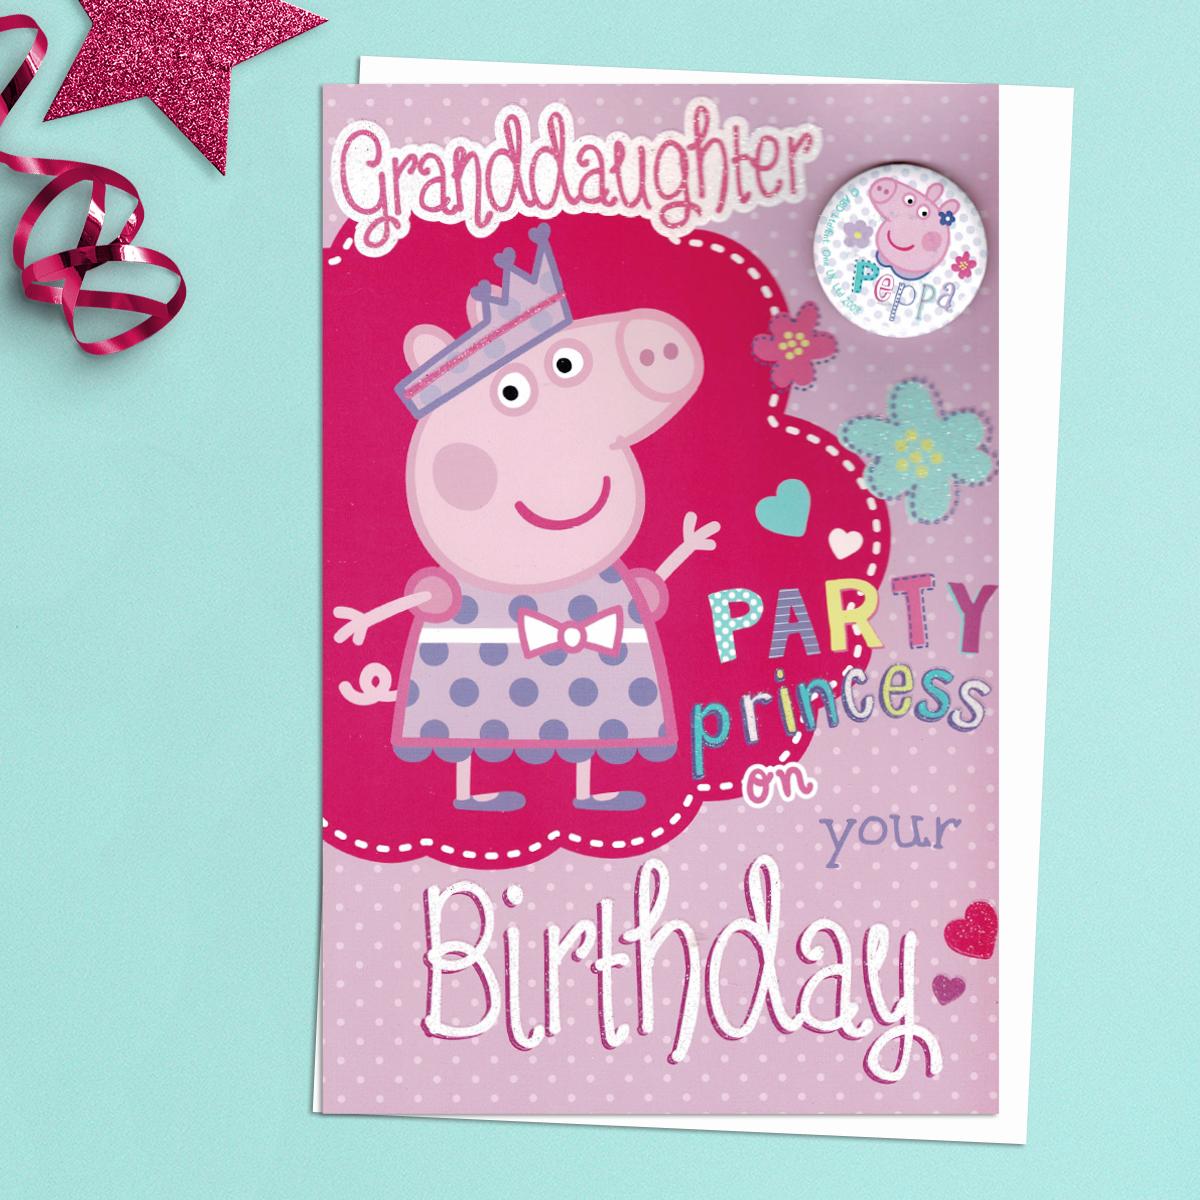 Granddaughter Party Princess Peppa Pig Card With Badge! Vibrant Colour With Added Sparkle. Complete With White Envelope